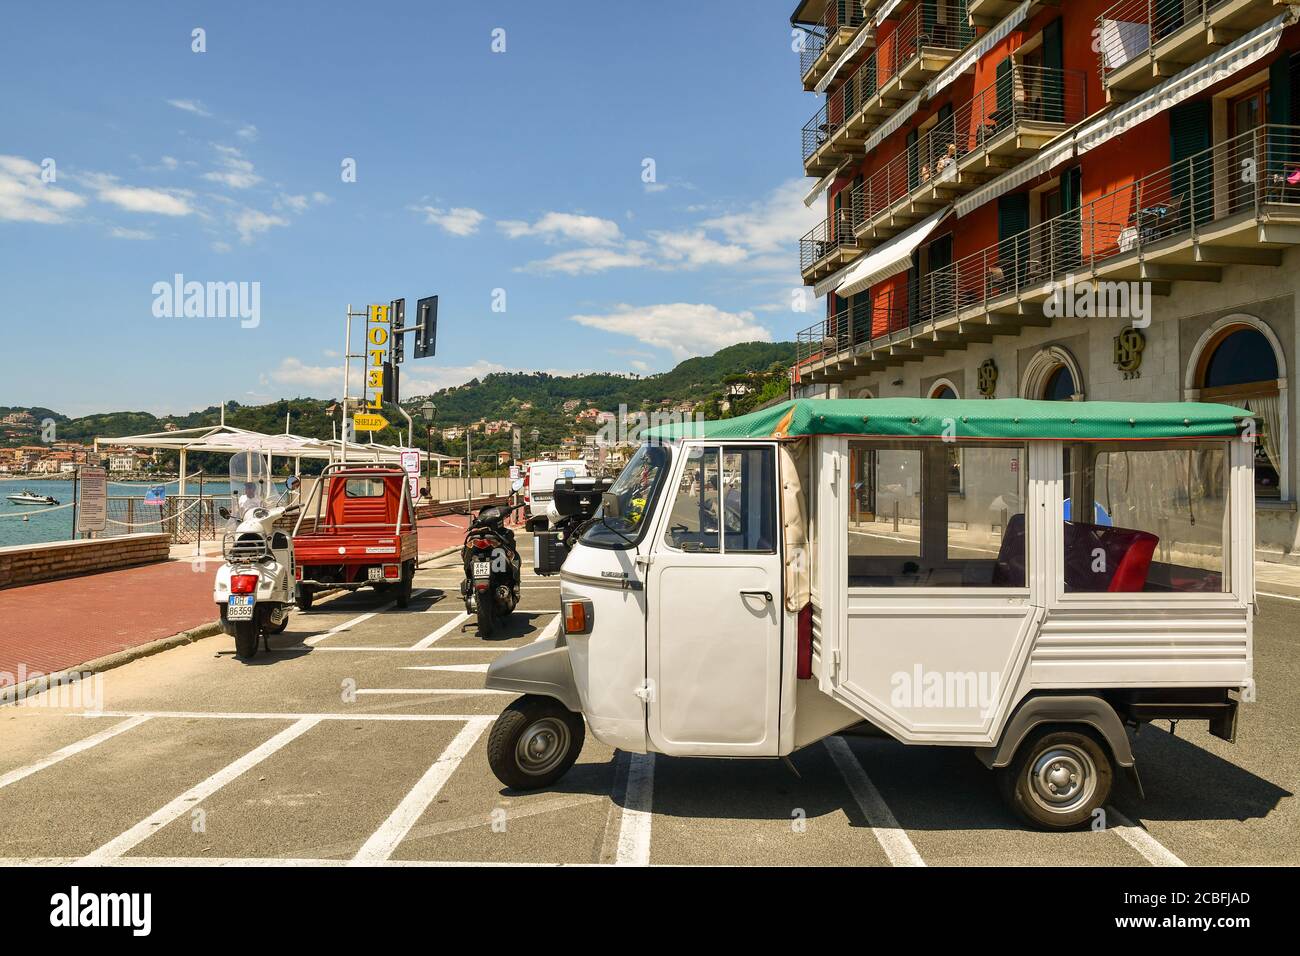 Piaggio Ape Calessino used to transport tourists parked in front of a beachfront hotel in summer, Lerici, La Spezia, Liguria, Italy Stock Photo